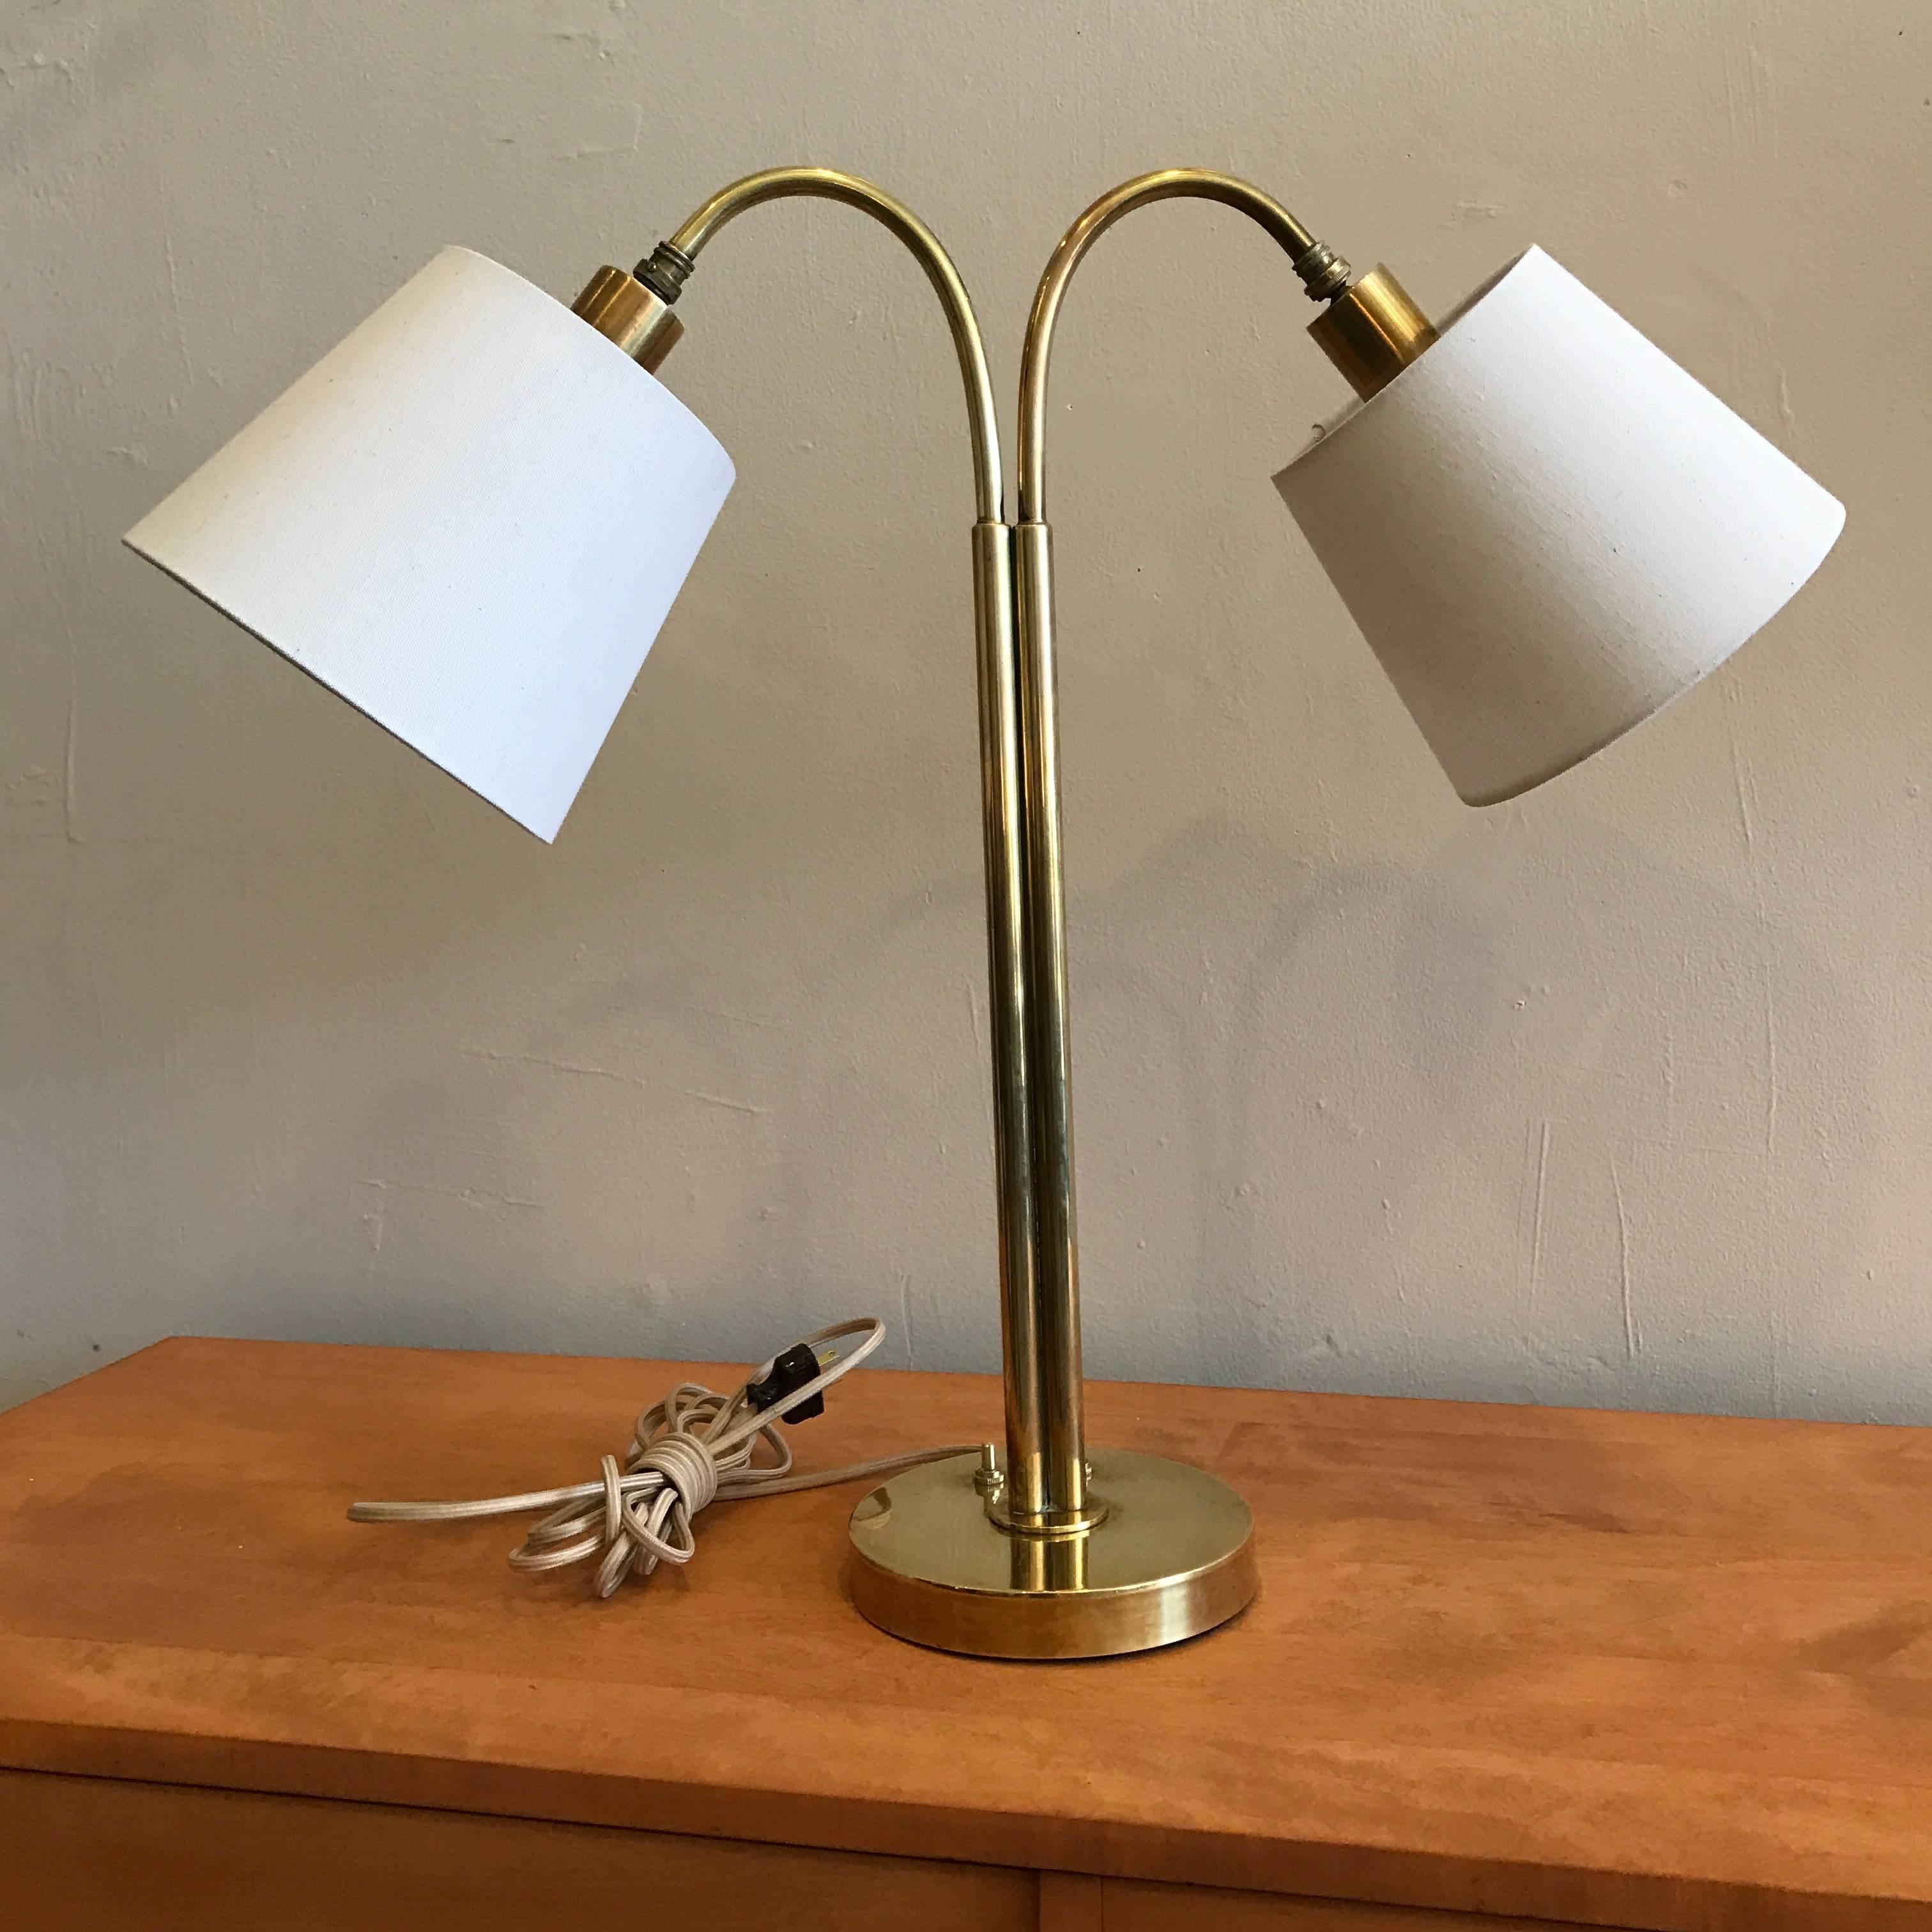 Handmade brass table lamp by California craftsman Norman Grag who's family spans generations in the crafts, his work was sold through Gumps of San Francisco. This solid brass two light table lamp has need custom linen shades and has been fully